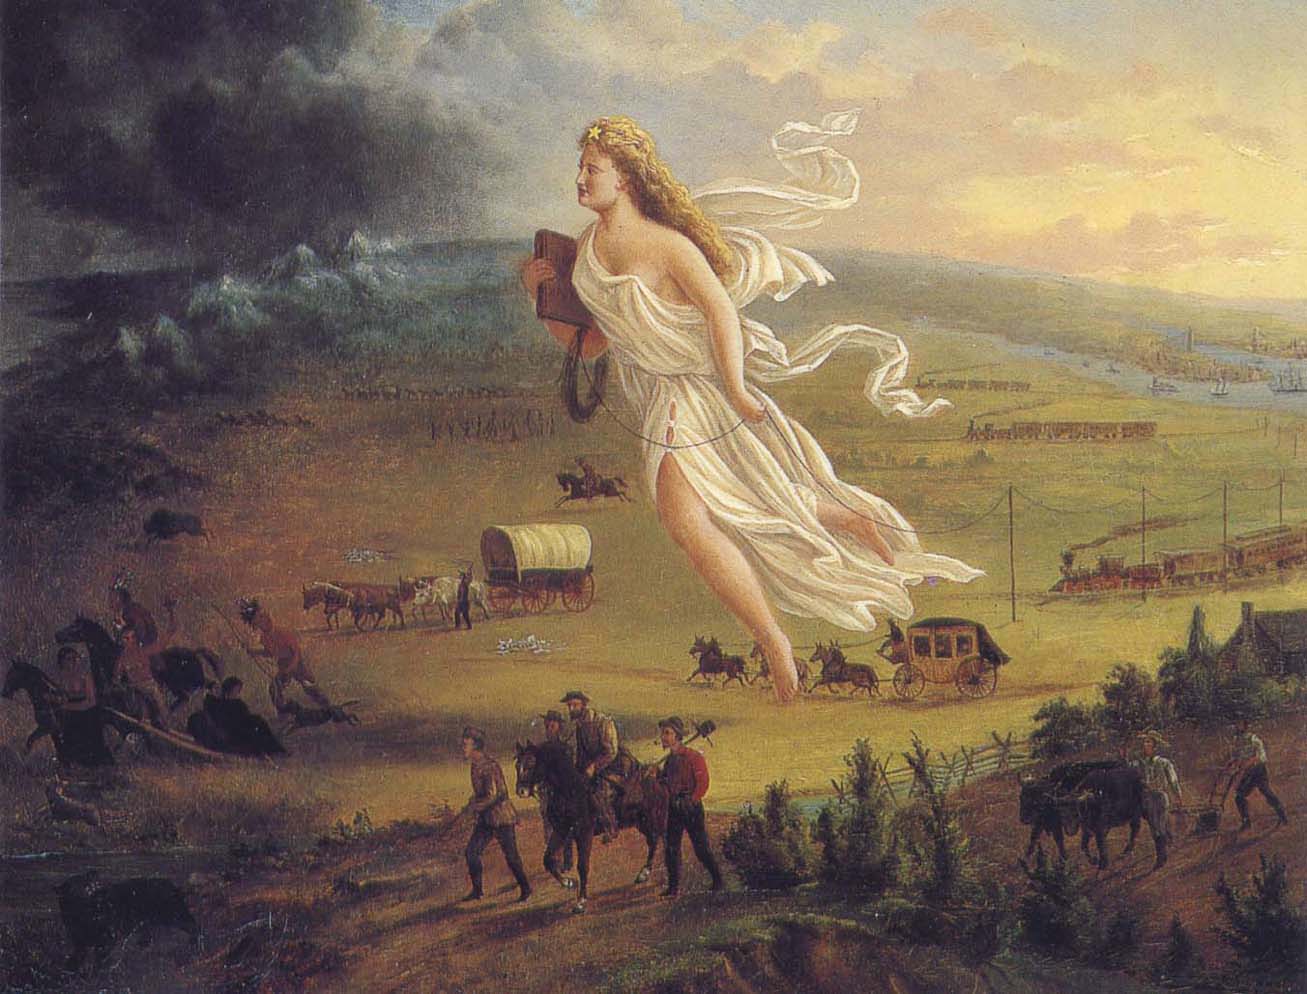 painting of people moving west, guided and protected by the angel Columbia